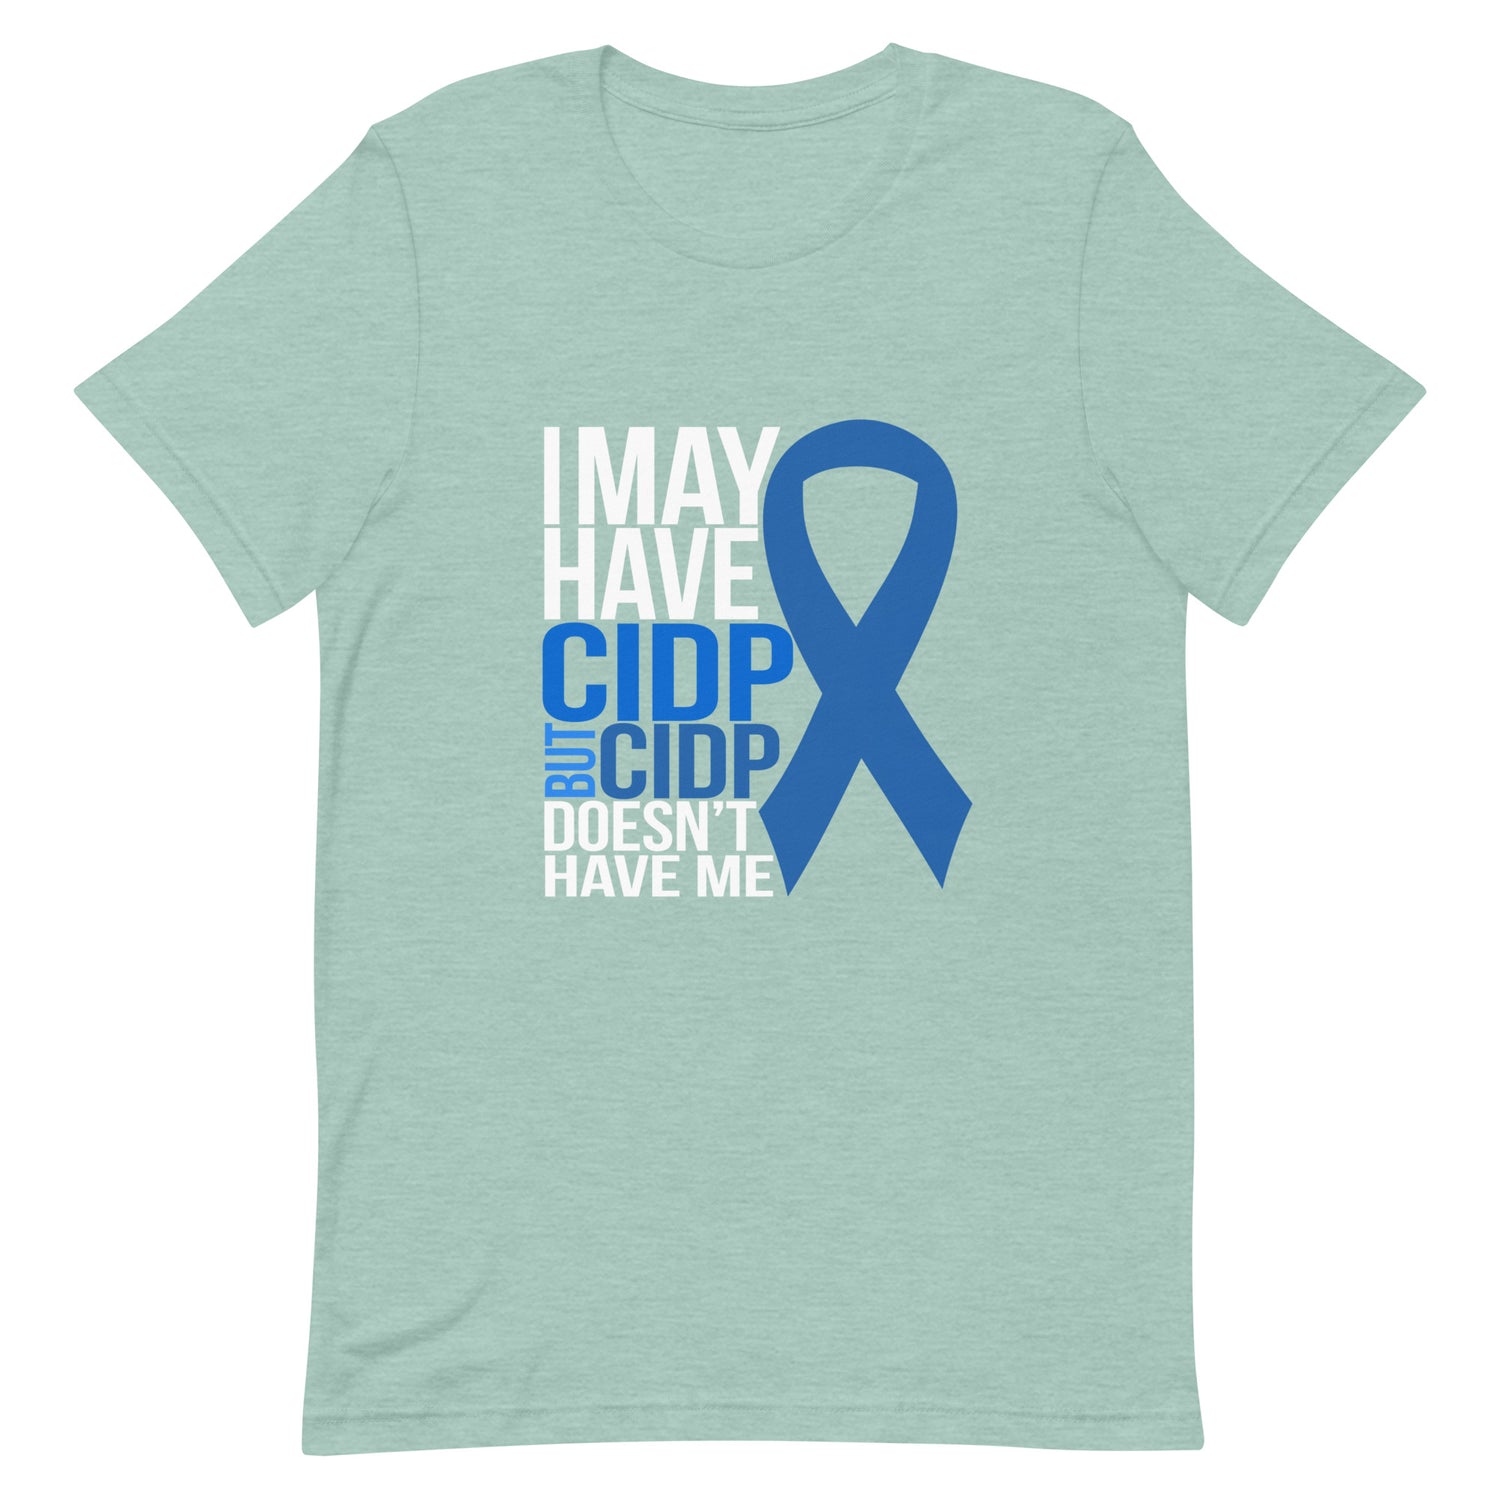 I May Have CIDP But CIDP Doesn't Have Me Shirt